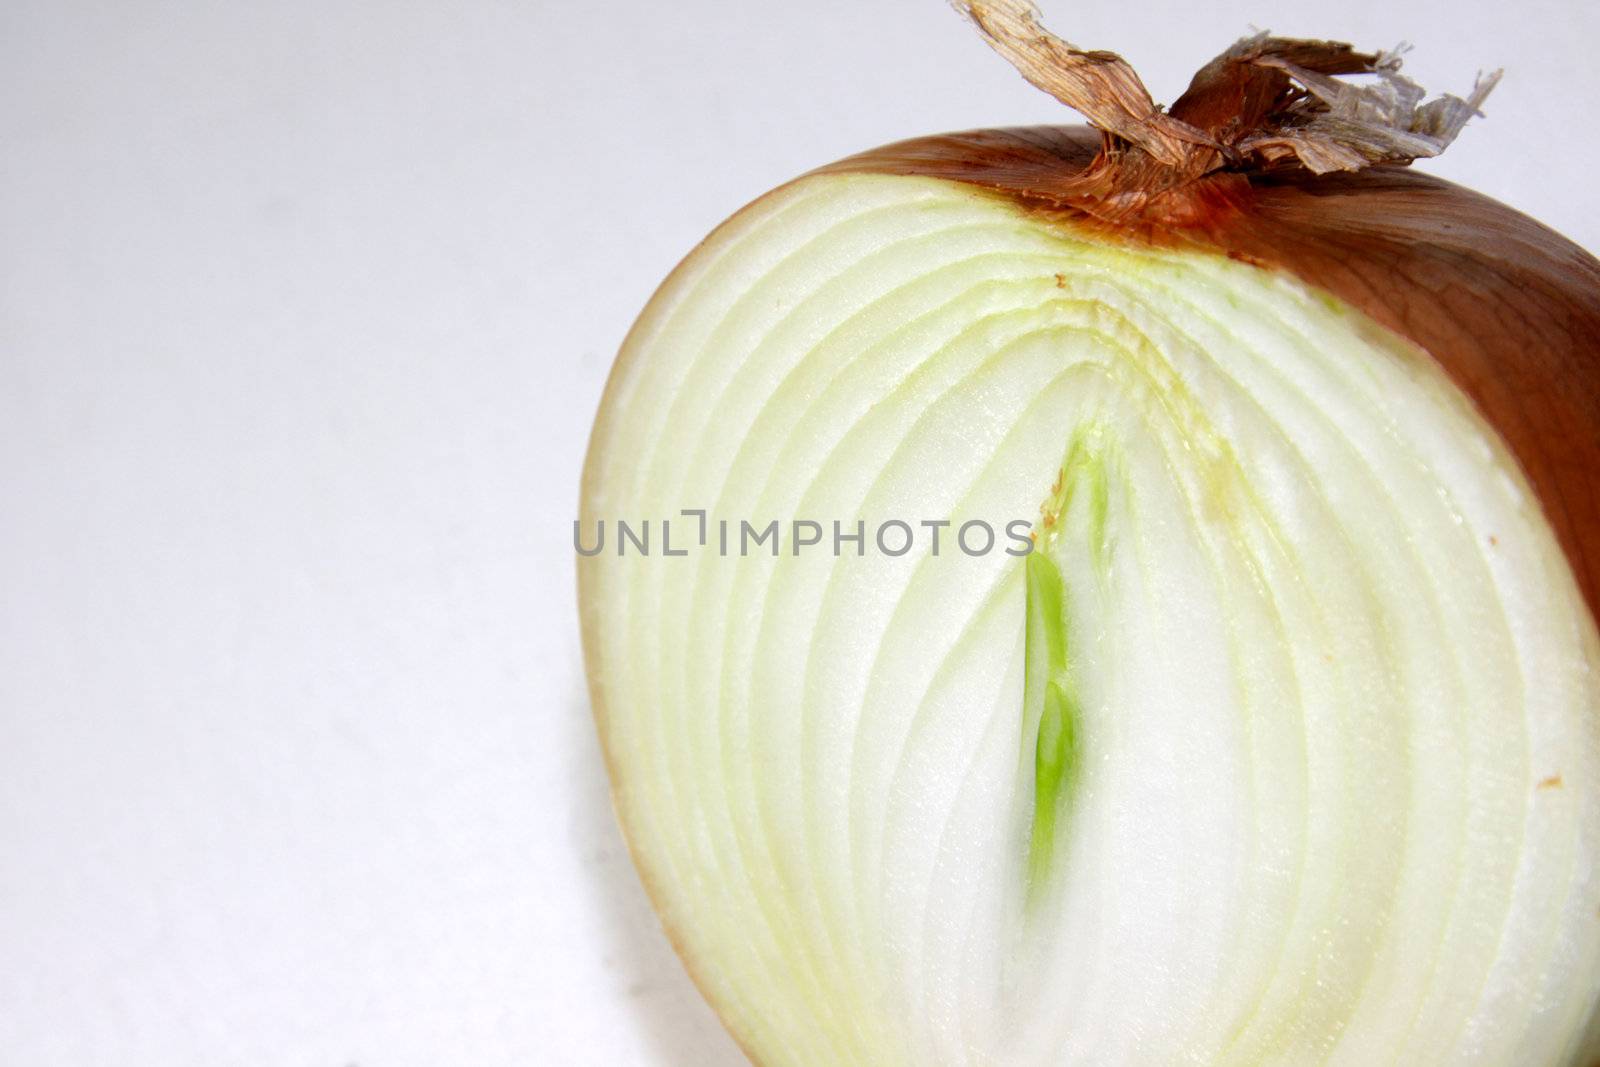 A close-up of a sliced large yellow onion sitting on a cutting board.
